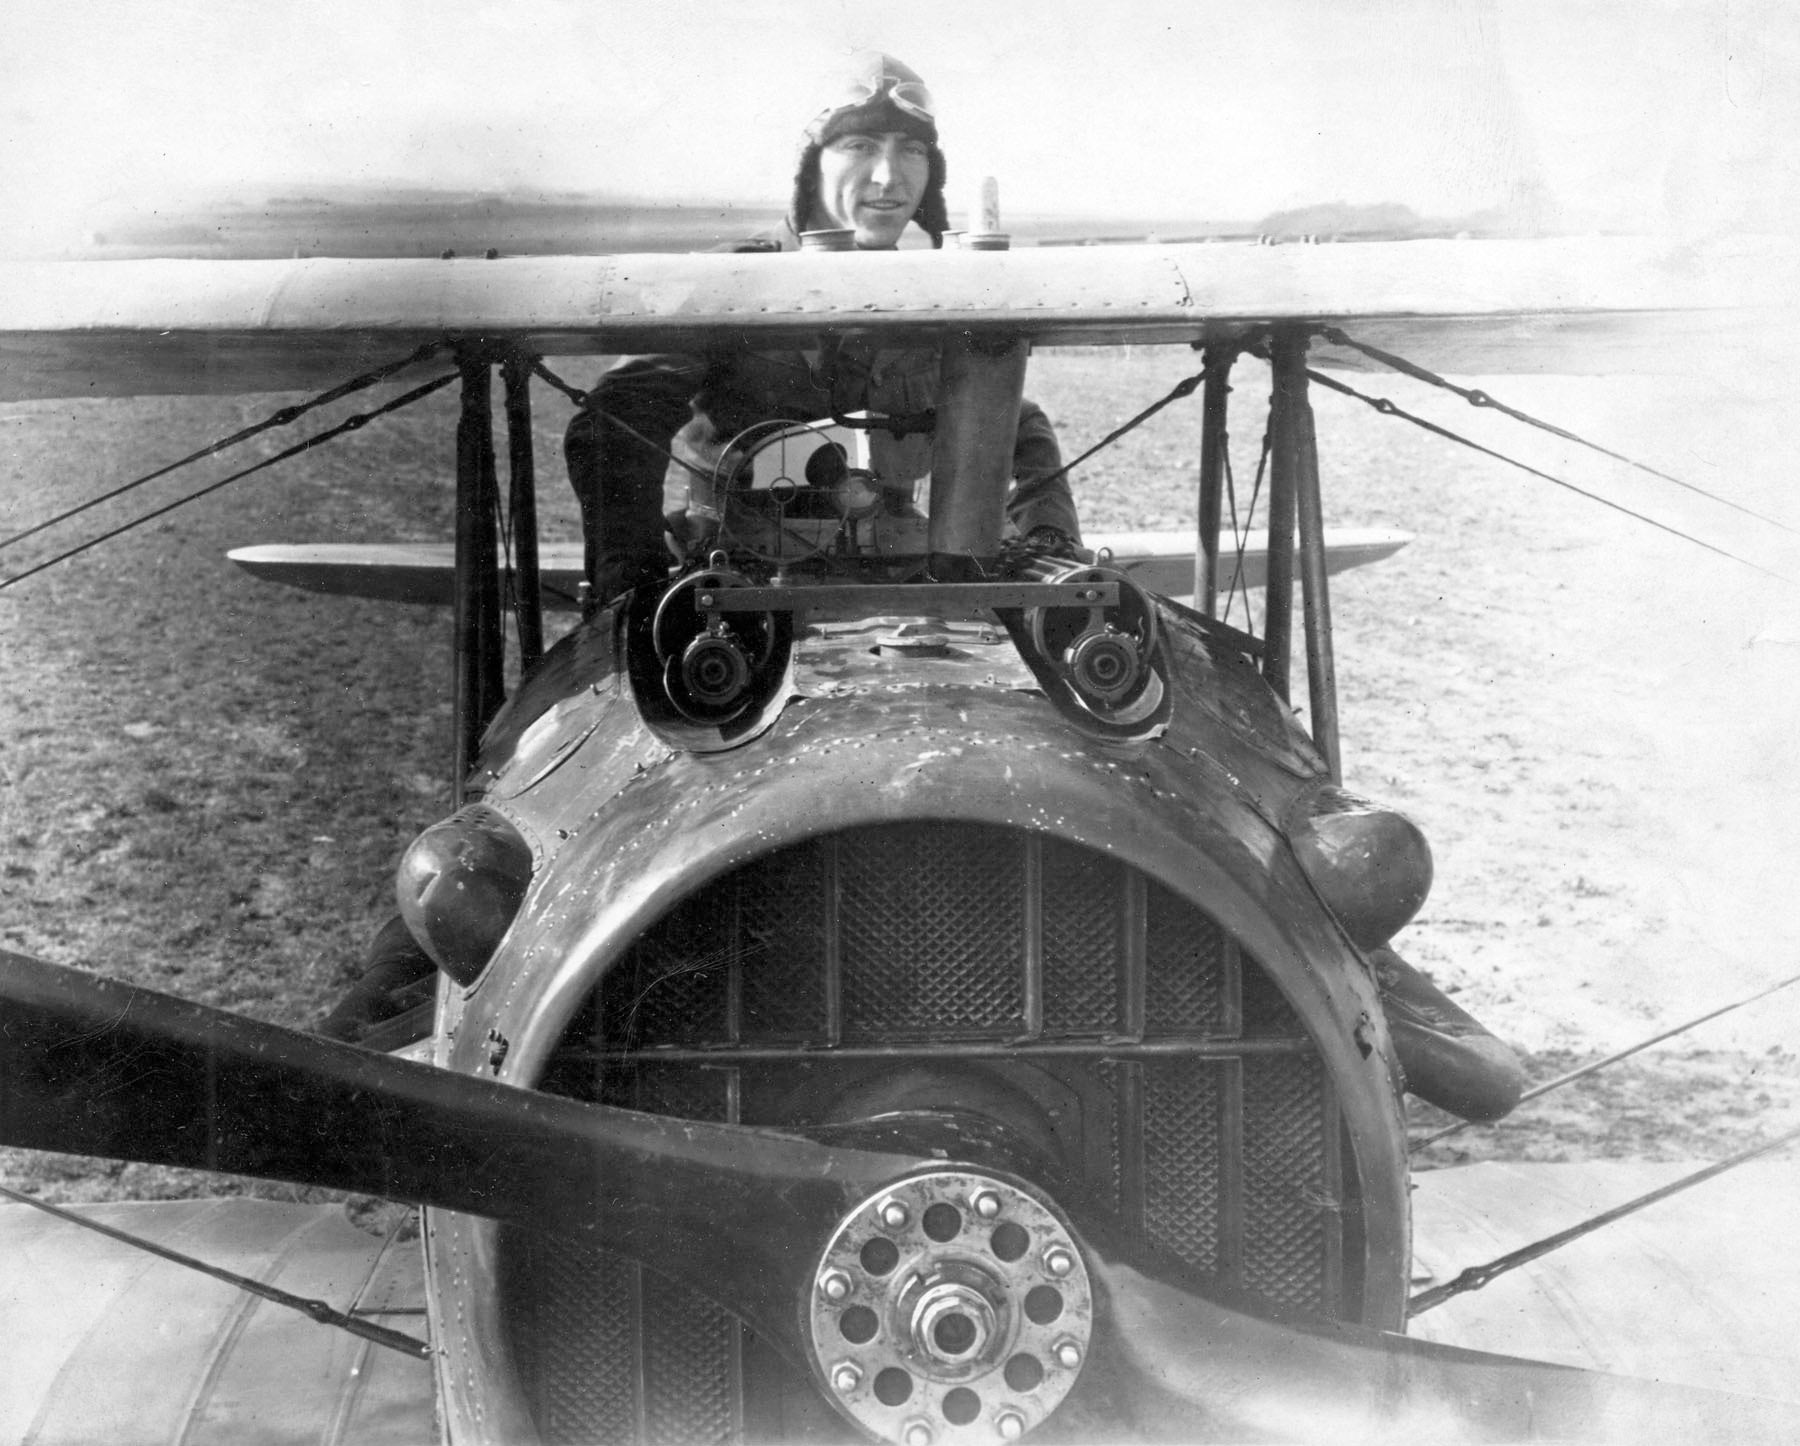 The near-suicidal way American pilots played possum in WW1